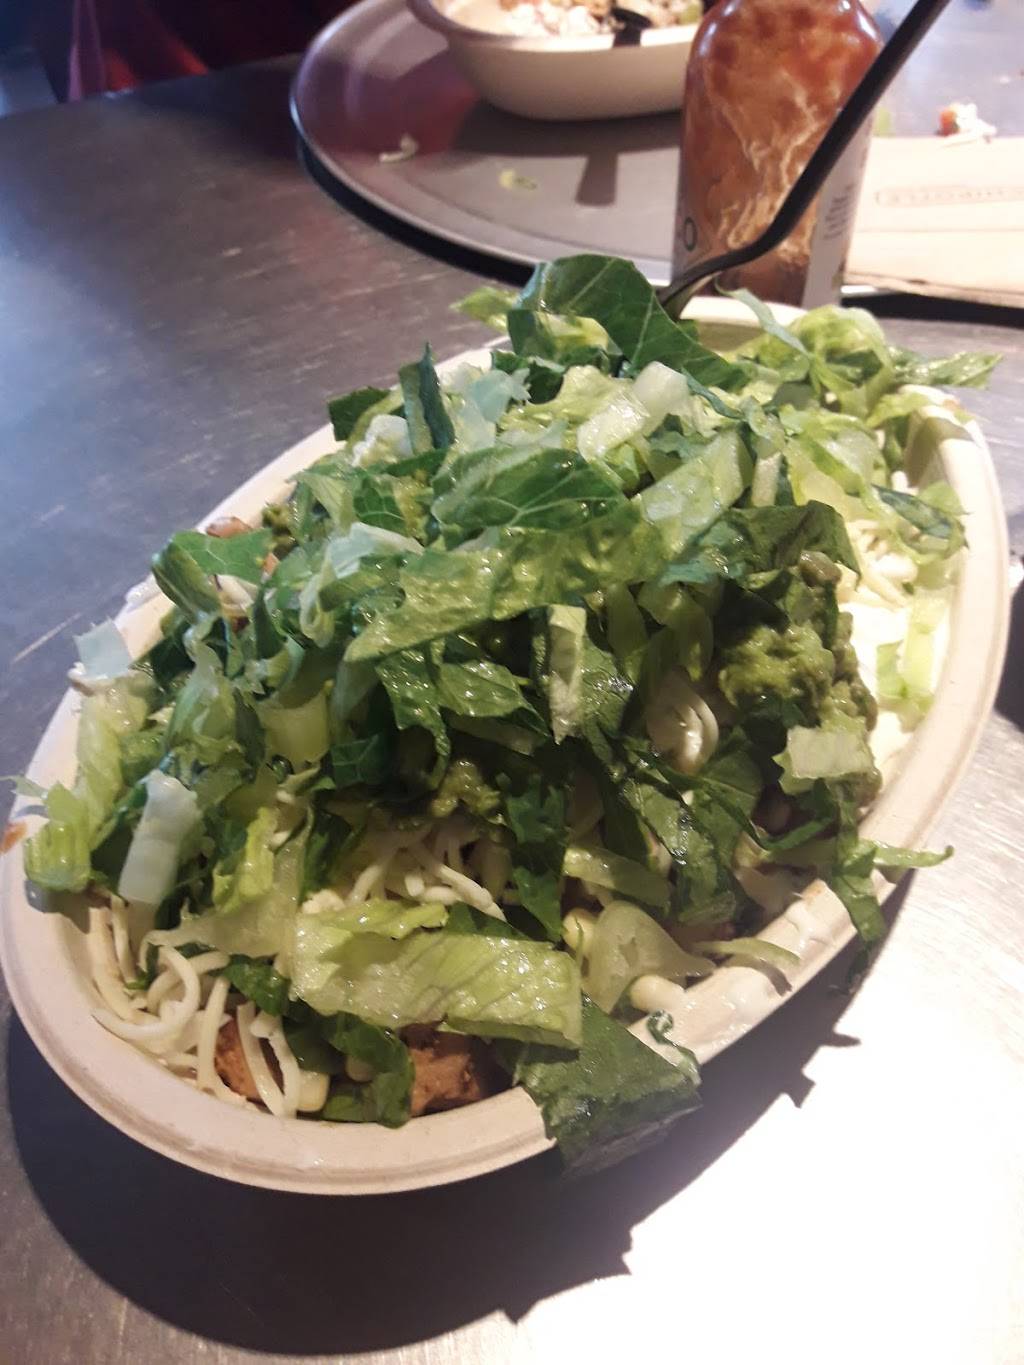 Chipotle Mexican Grill | restaurant | 8461 Leesburg Pike Ste A, Vienna, VA 22182, USA | 5713261608 OR +1 571-326-1608